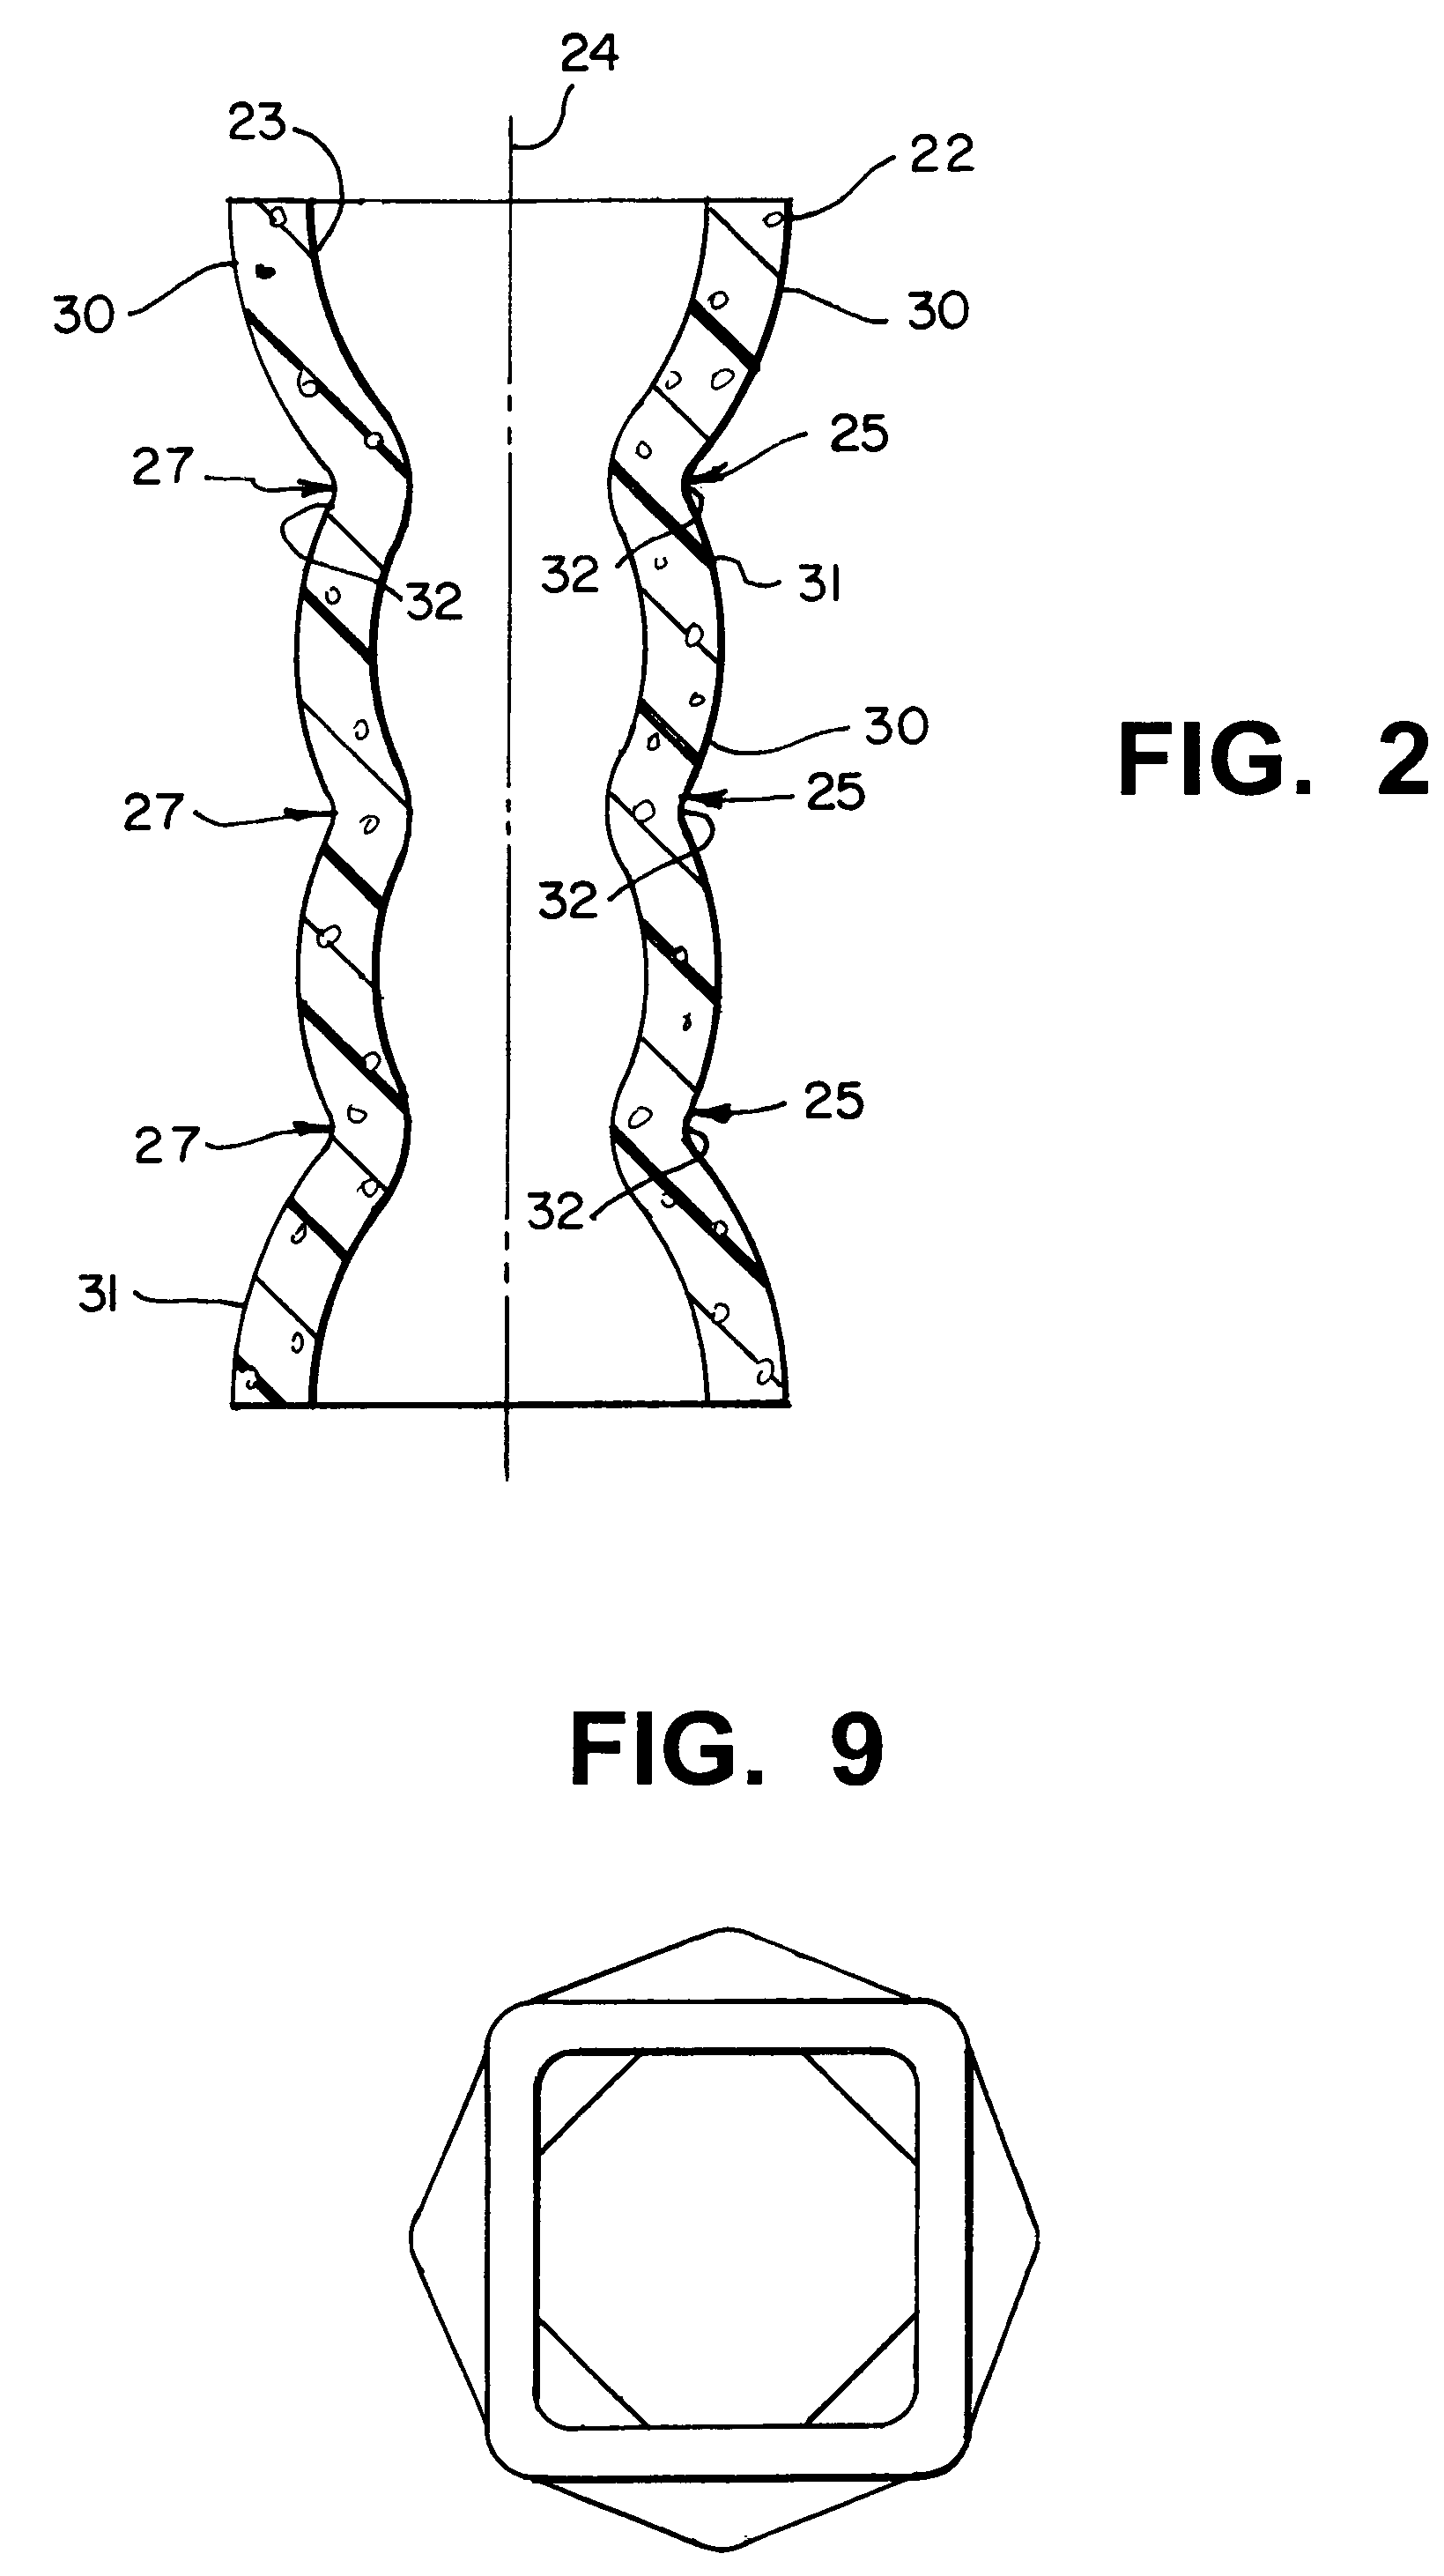 Load bearing or cushioning elements and method of manufacture